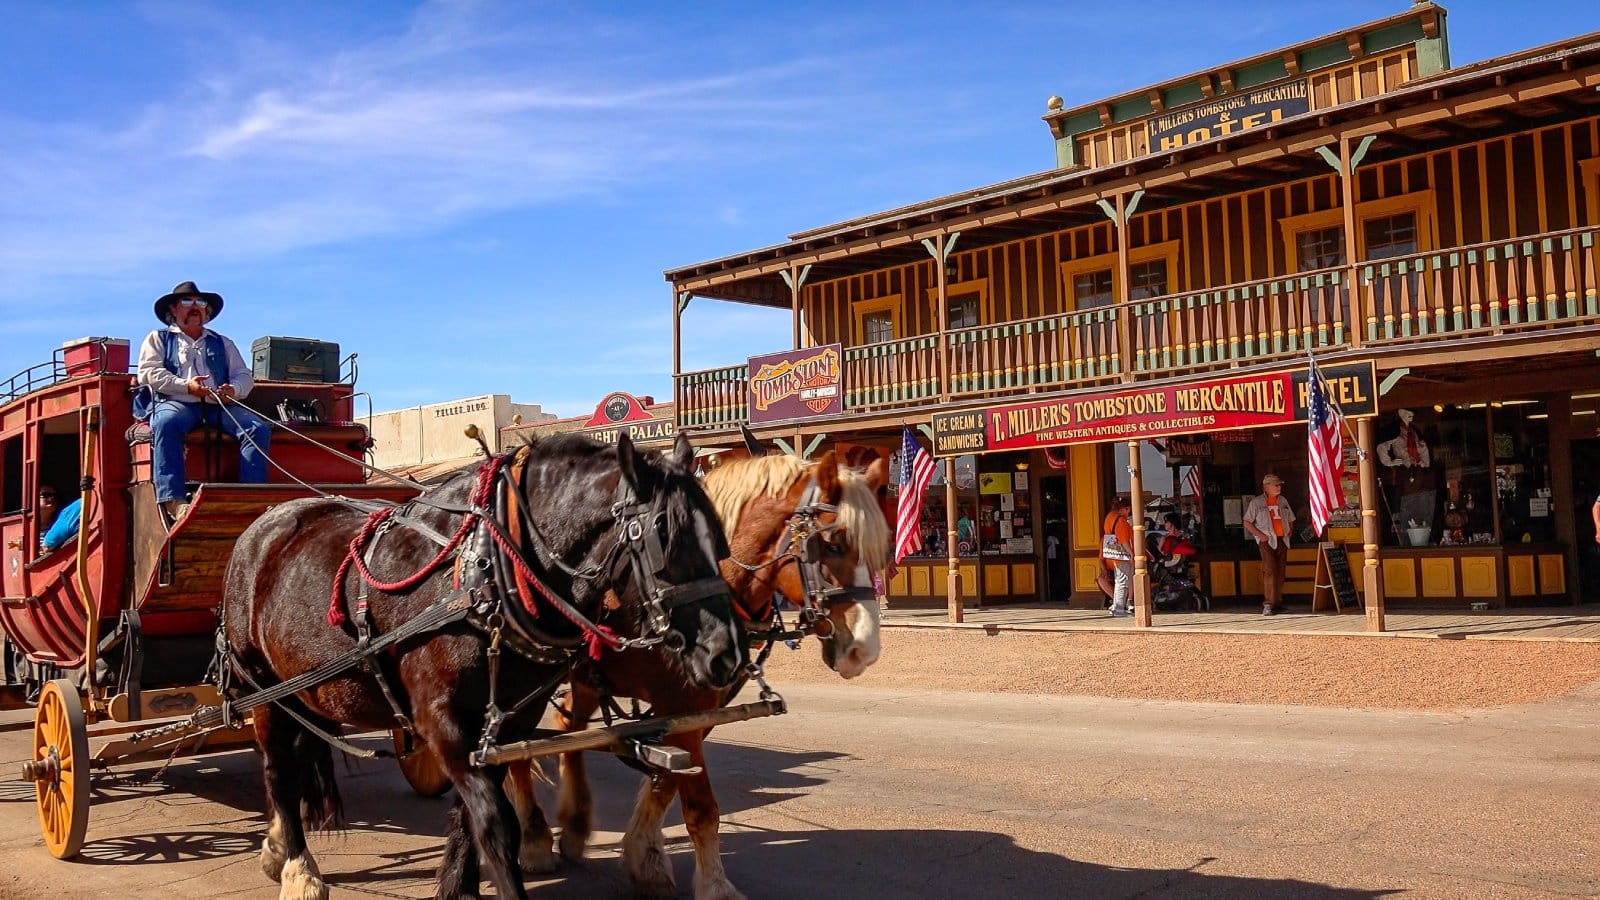 <p class="wp-caption-text">Image Credit: Shutterstock / CrackerClips Stock Media</p>  <p><span>Because what’s the Wild West without a little outlaw lore? Visit the hideouts and feel slightly rebellious for the afternoon.</span></p>